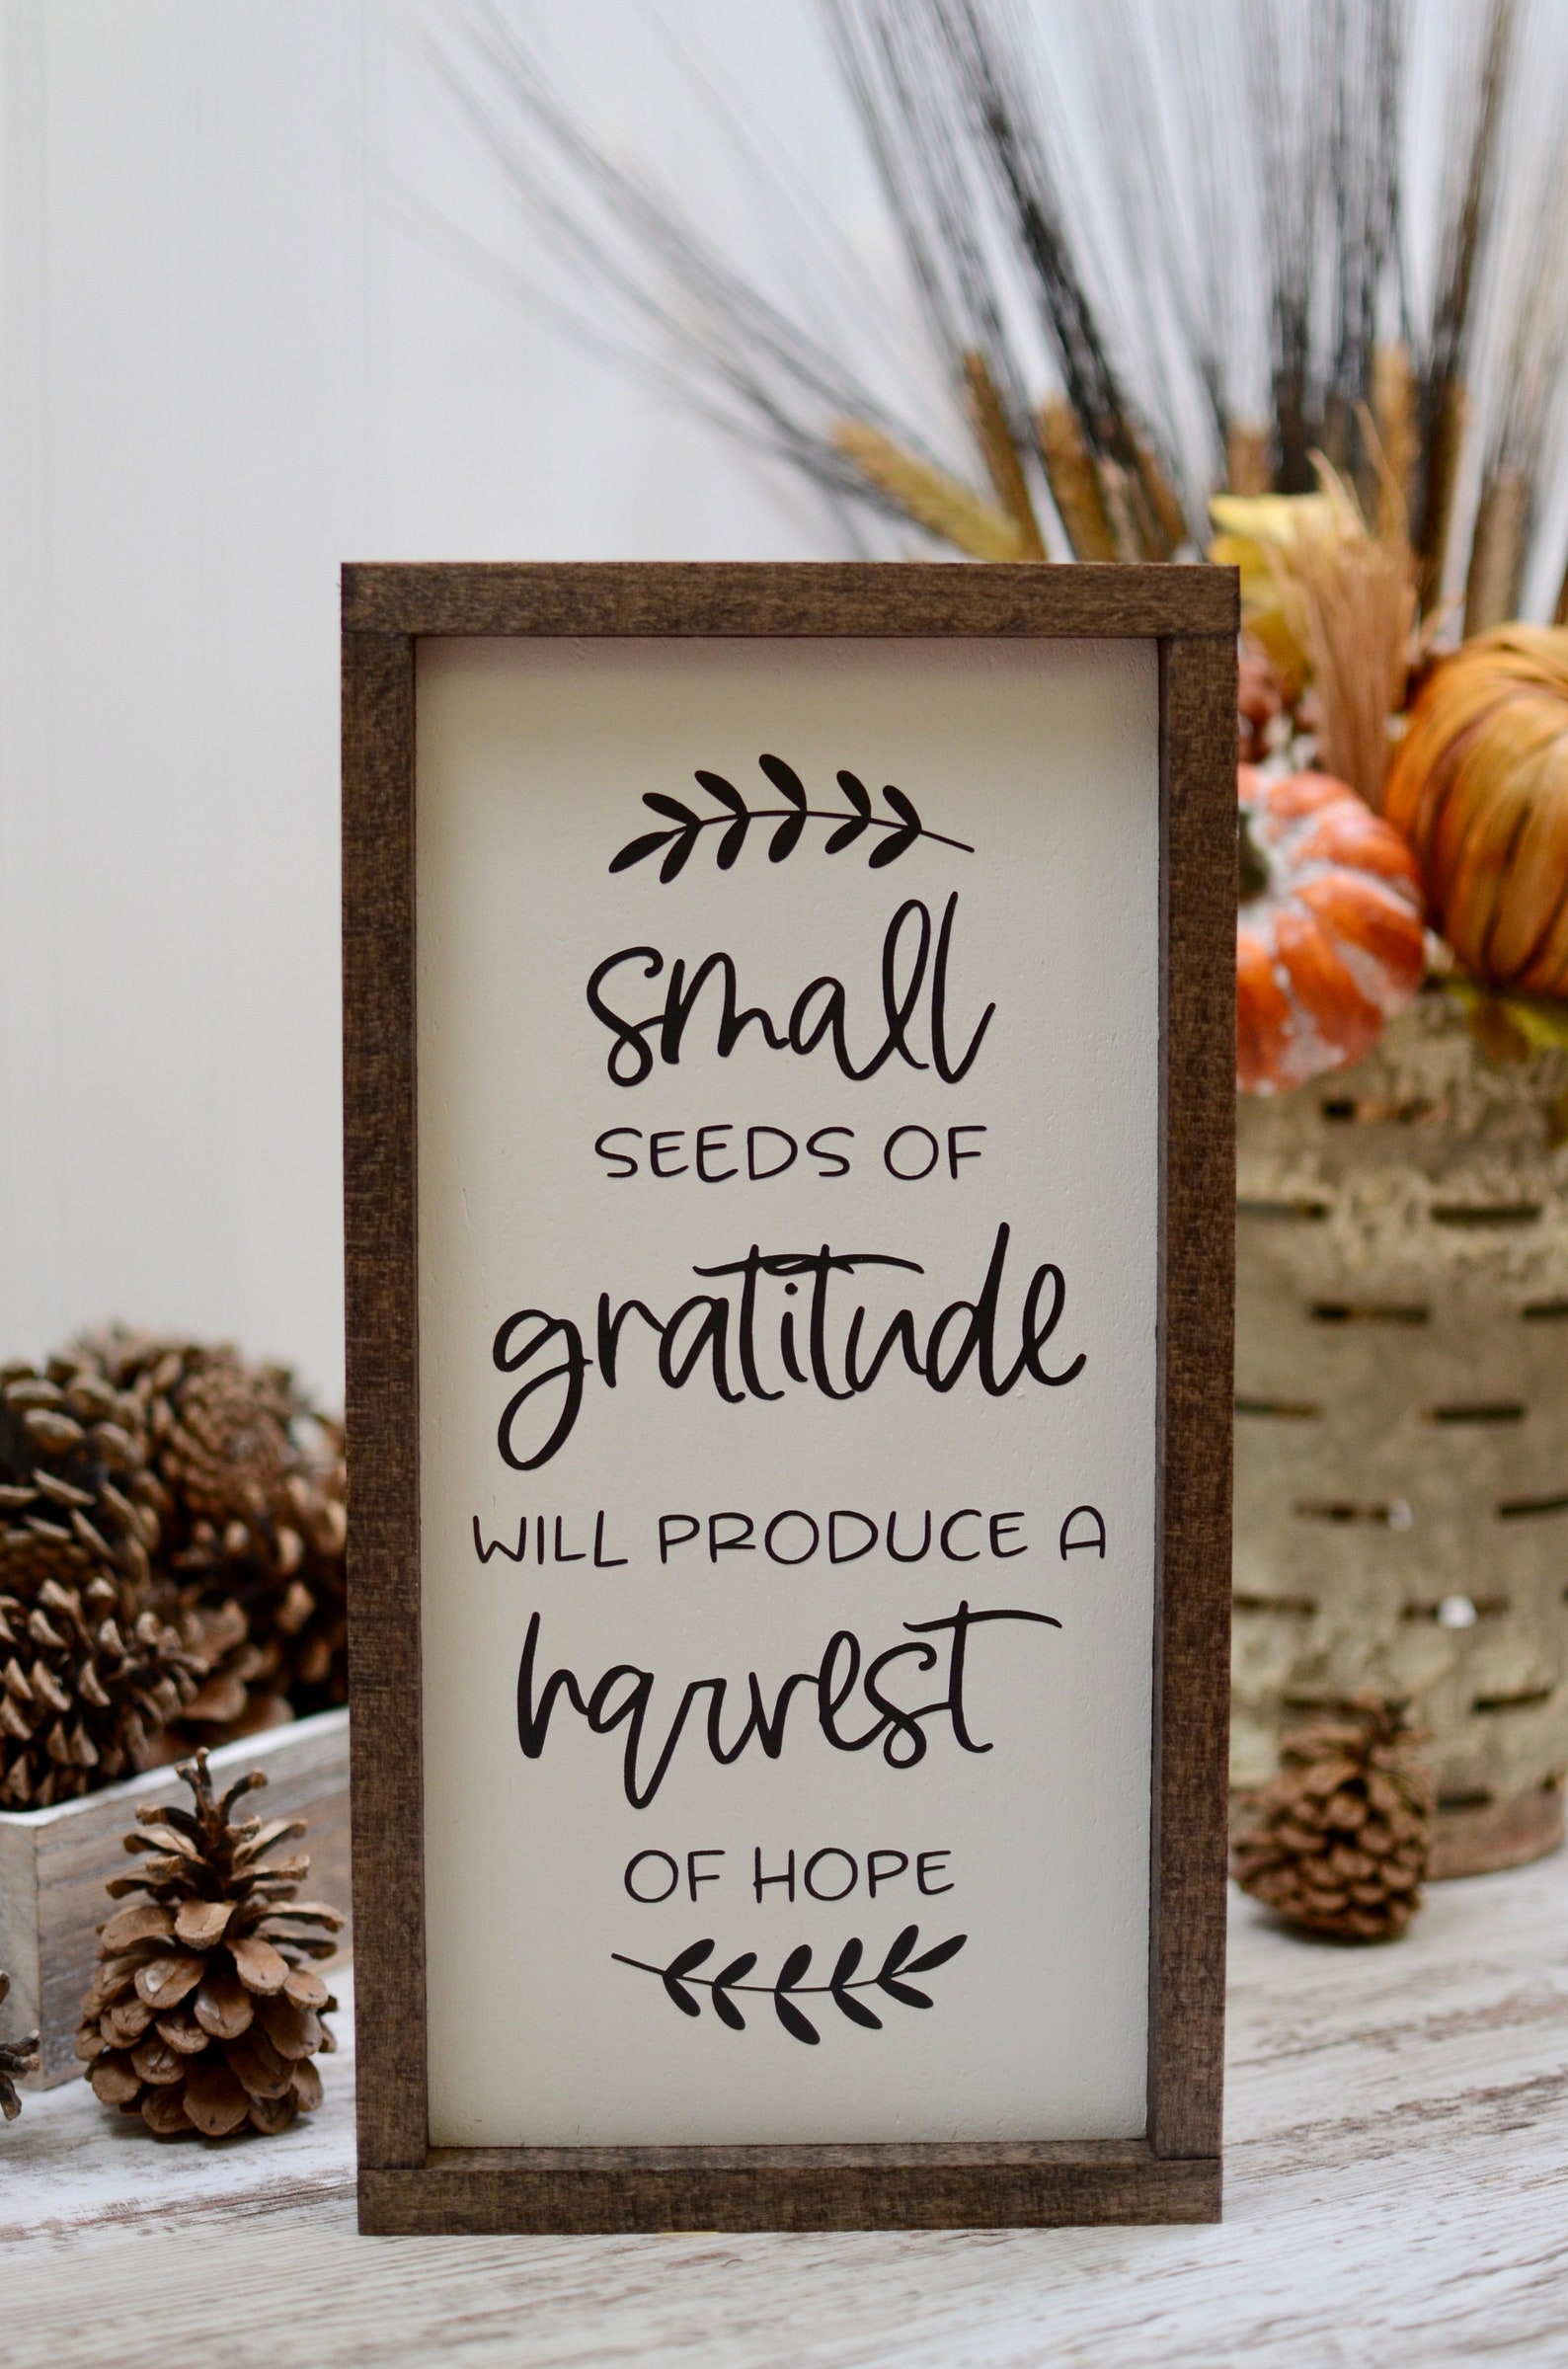 Small Seeds of Gratitude Will Produce a Harvest of Hope - Etsy